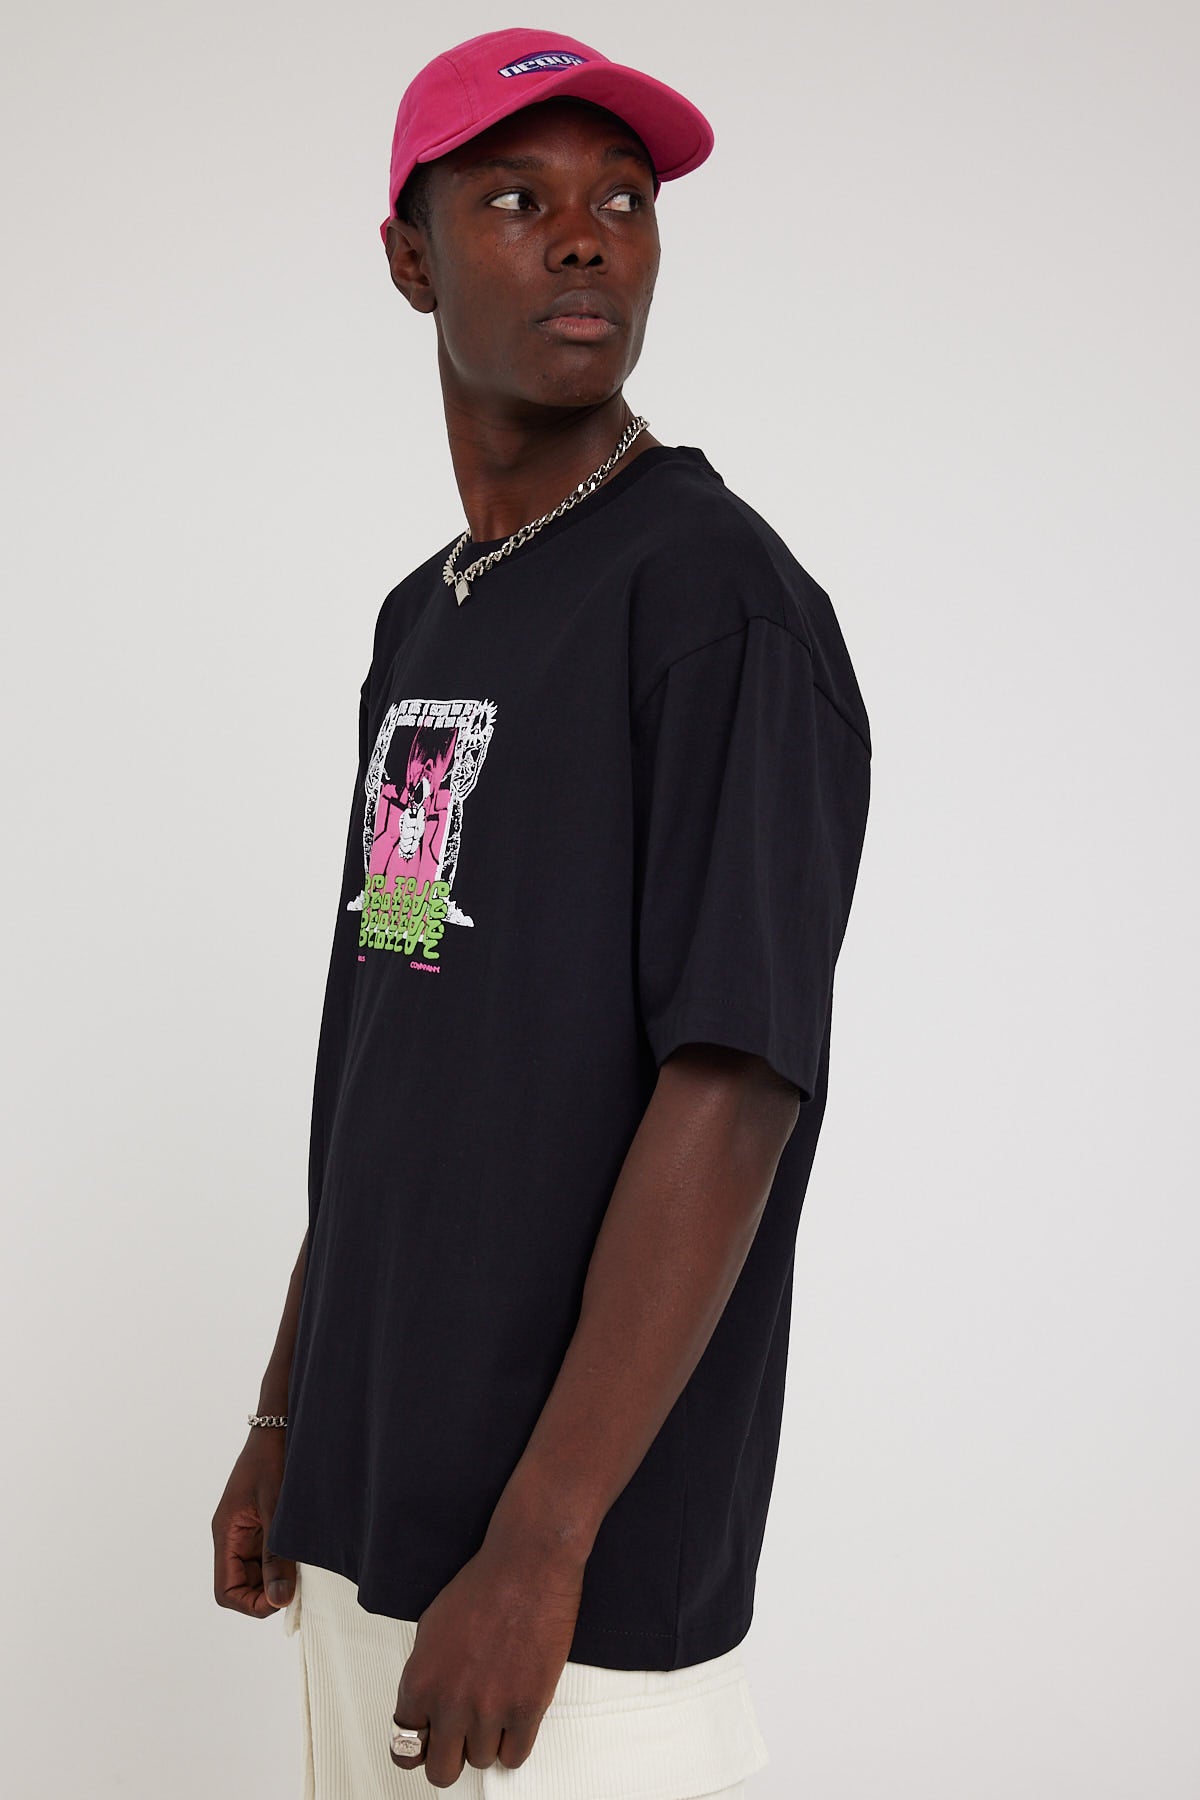 Thrills Escape the Past Oversized Fit Tee Black – Universal Store